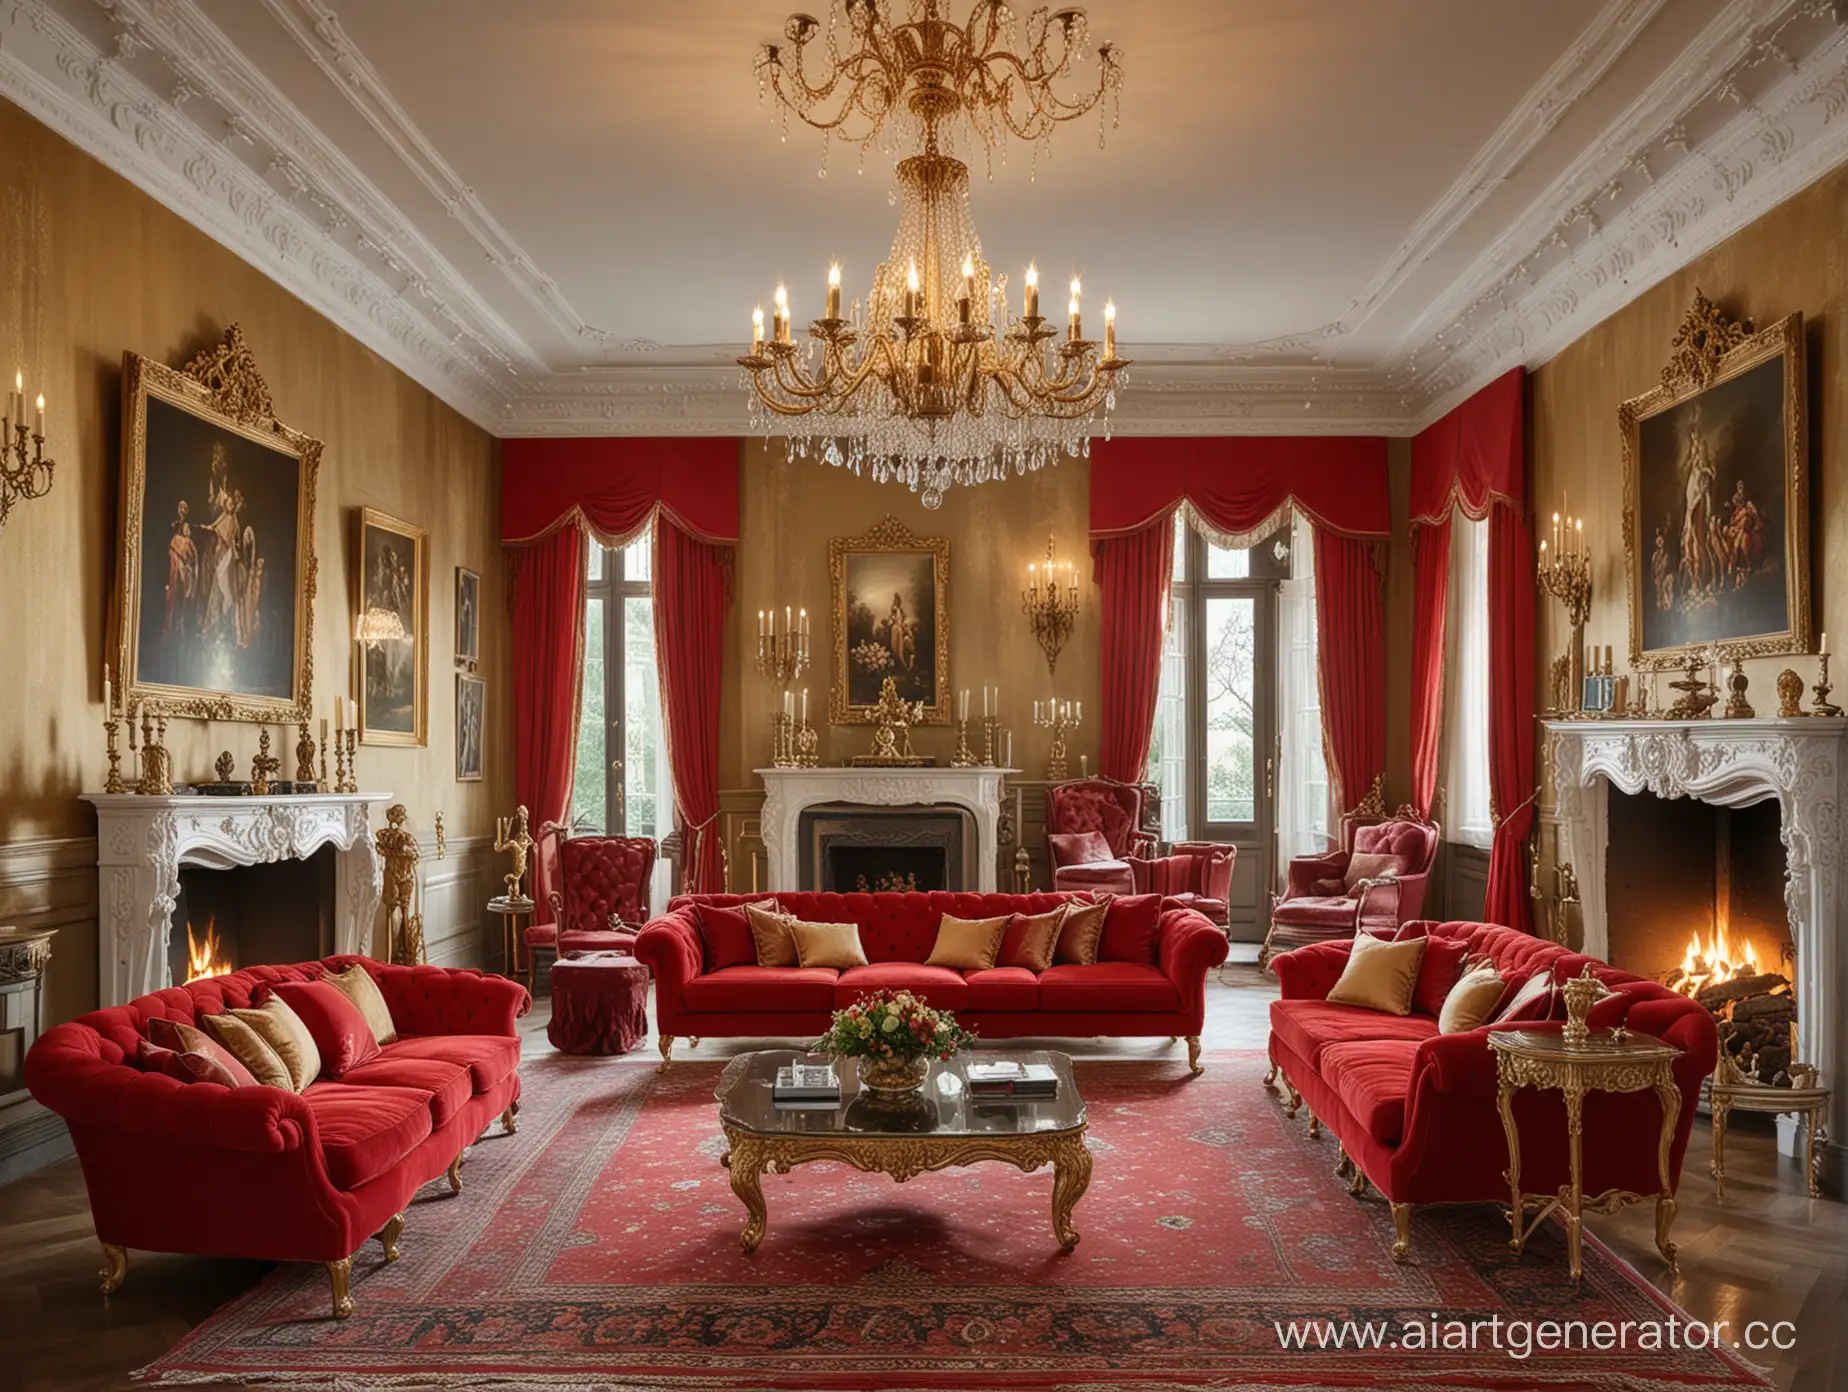 Opulent-Living-Room-with-Red-Sofa-Fireplace-and-Chandelier